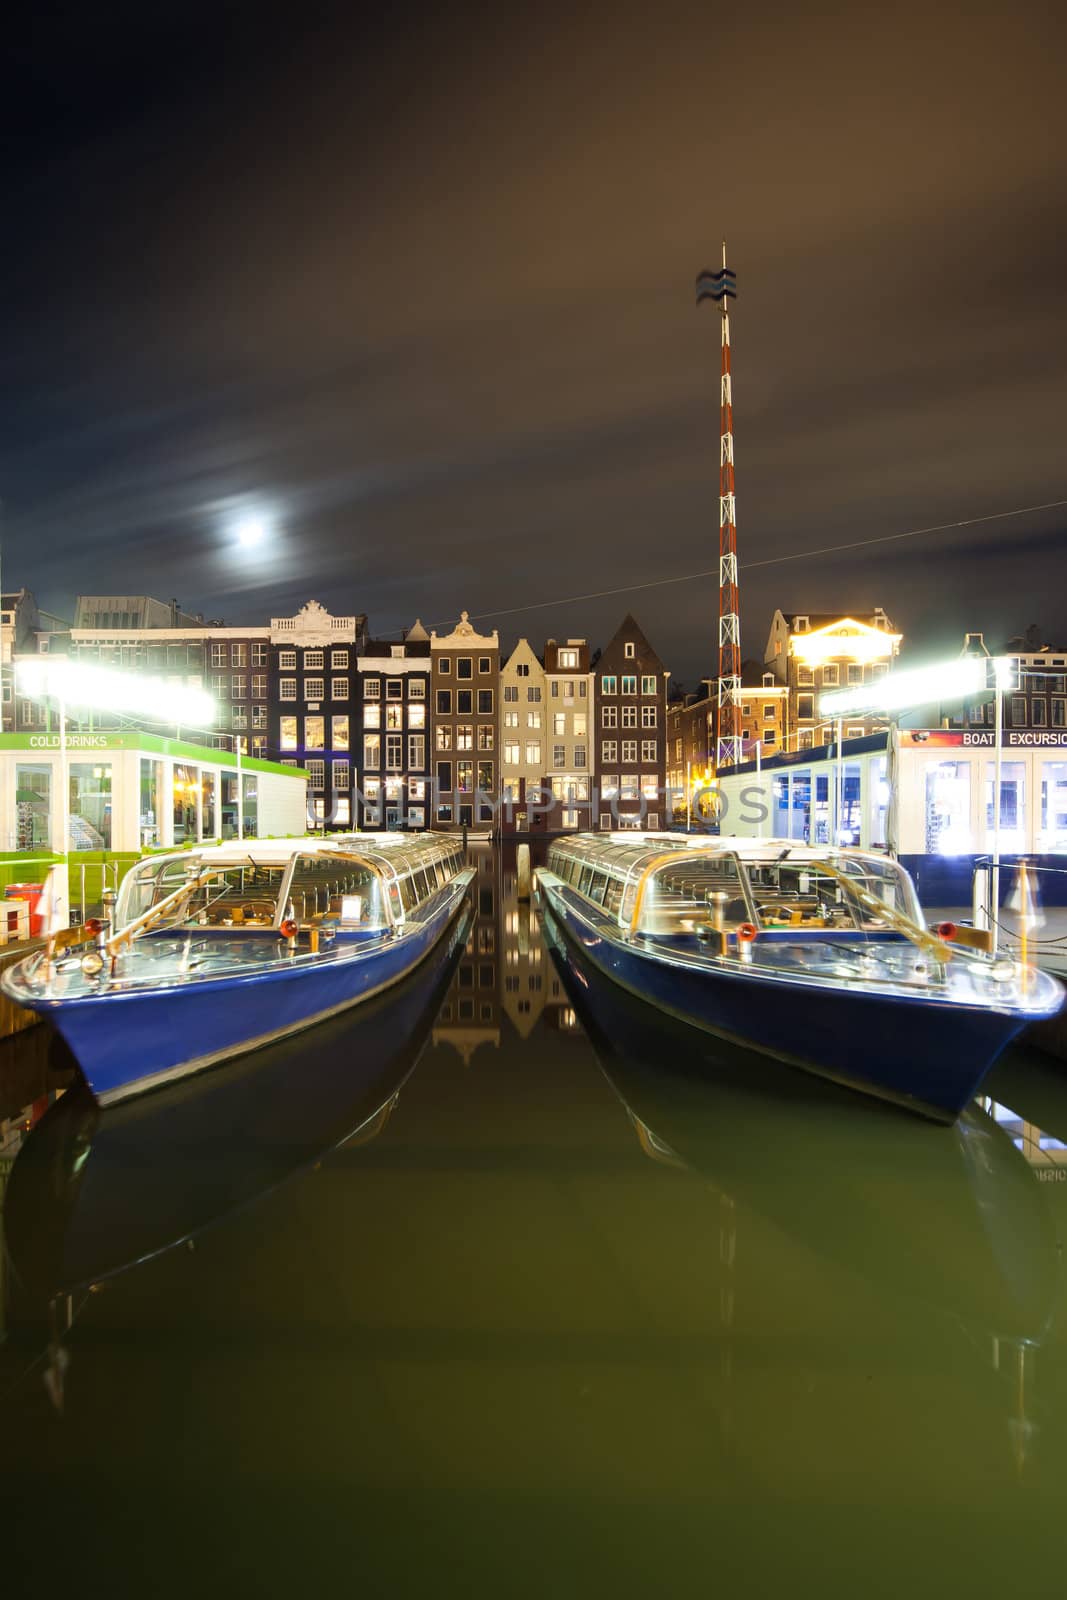 Amsterdam by night - excursion boat quay - photo taken at ultra wide angle